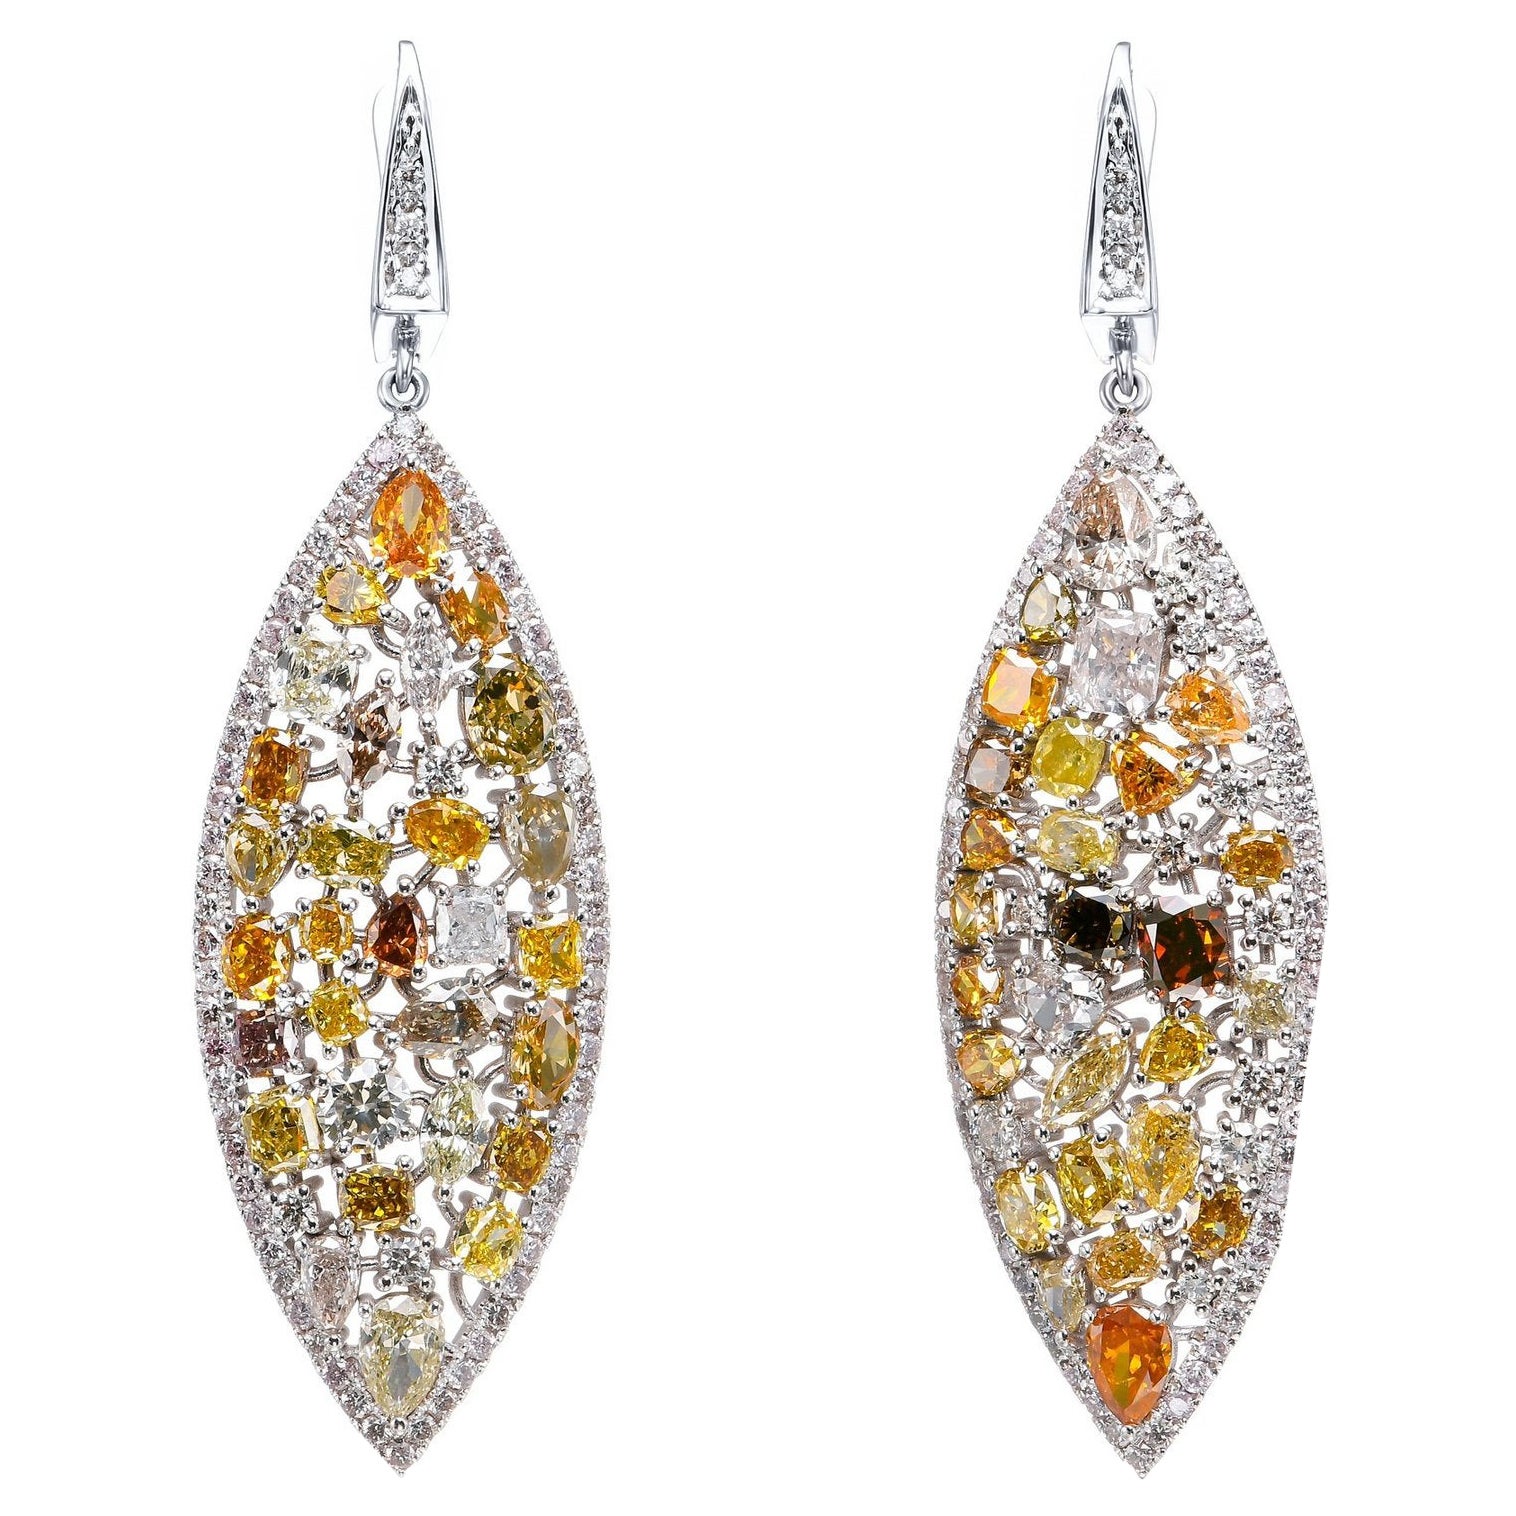 NO RESERVE!  -  11.55cttw Fancy Color Diamonds - 14 kt. White gold - Earrings For Sale